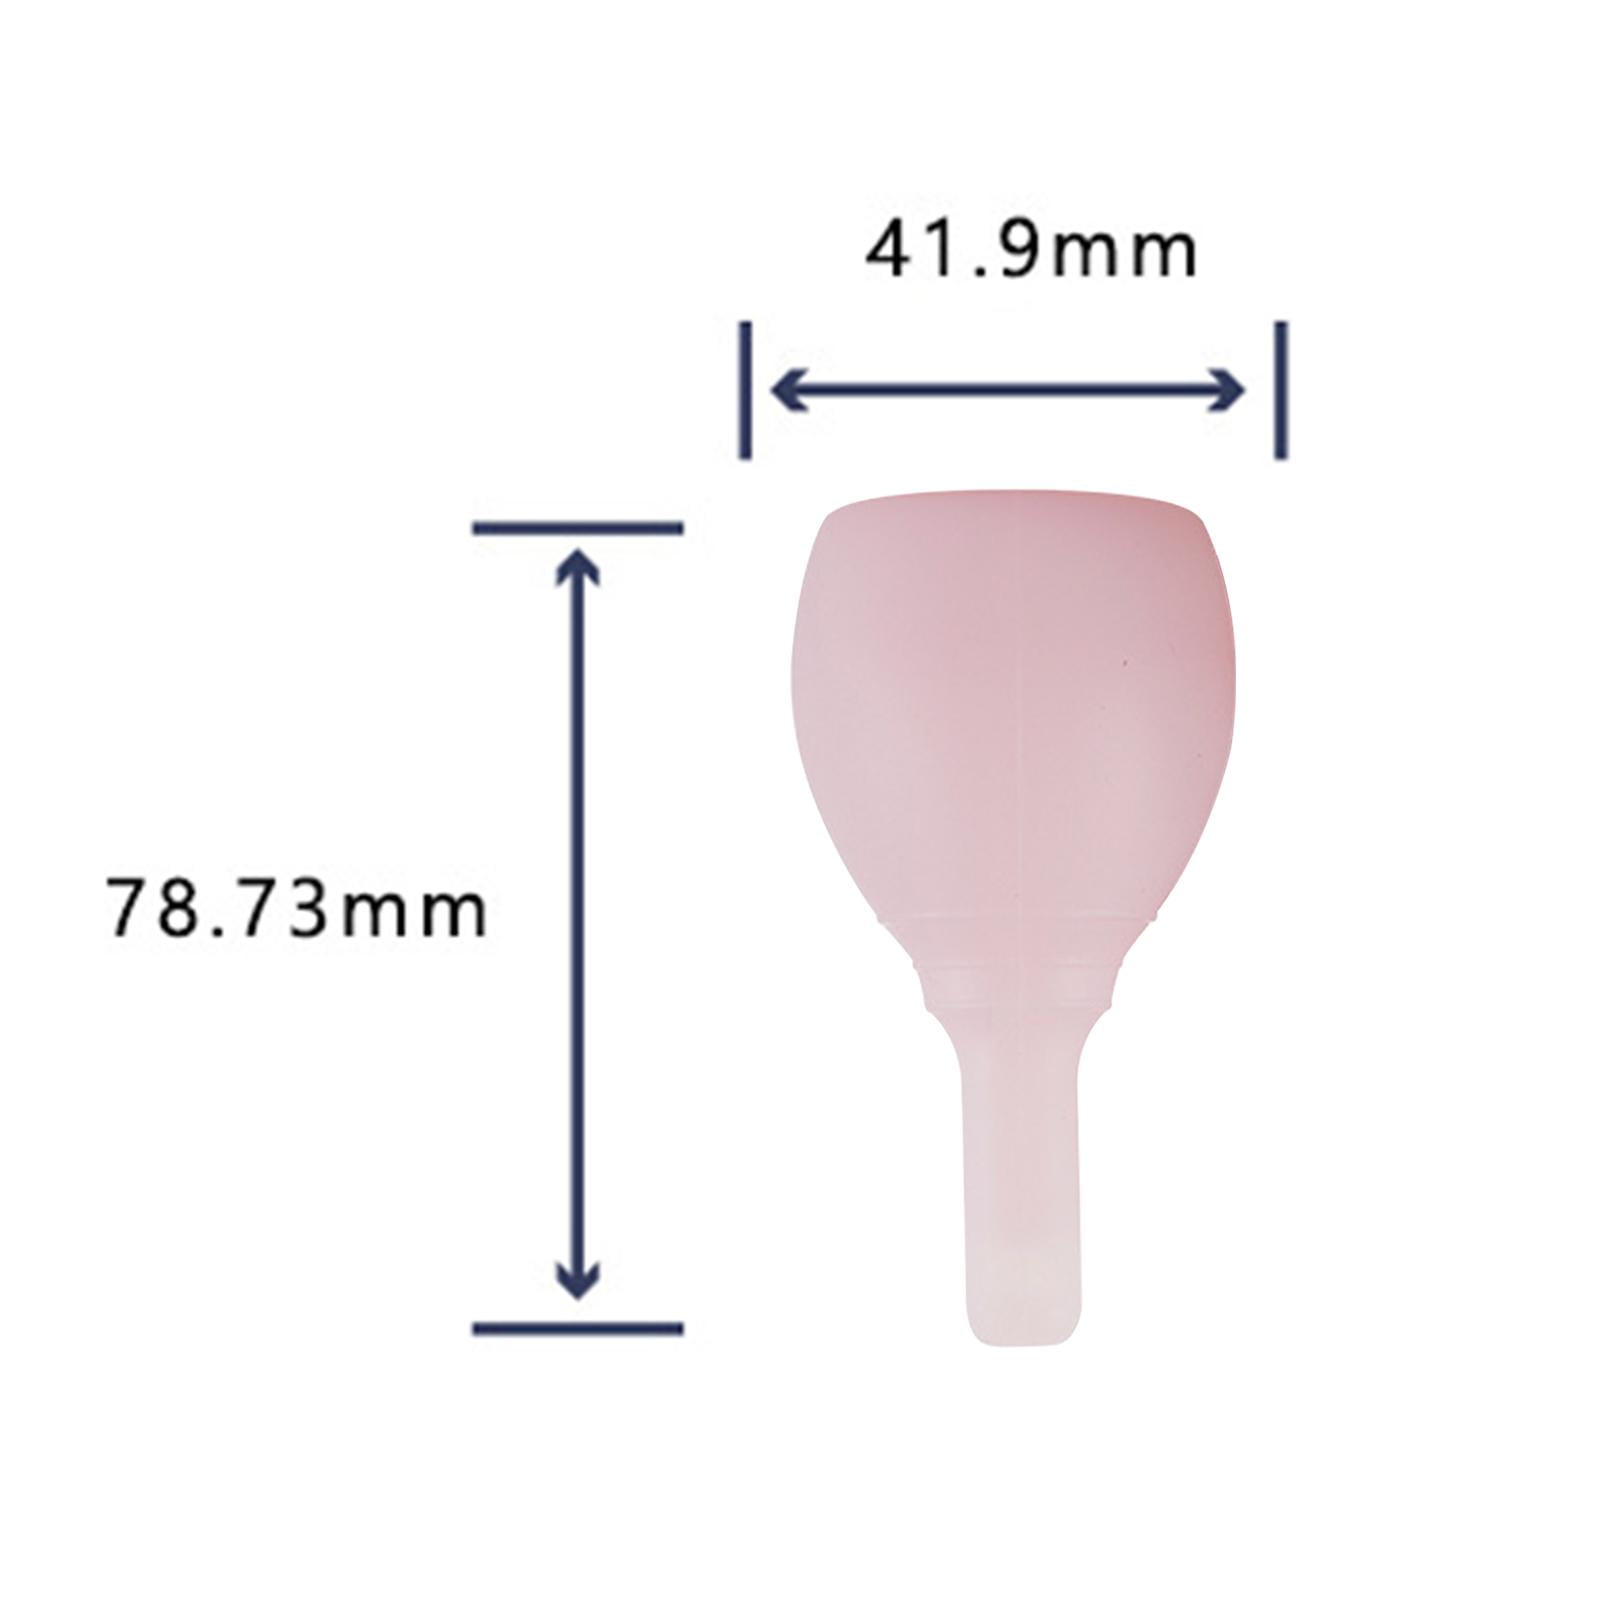 Women Silicone Menstrual Cups Sterilizing Breathable Flexible Period Cups  for Travel Storing Cup Press The Handle to Drain , S Pink, 2 Sizes Optional  